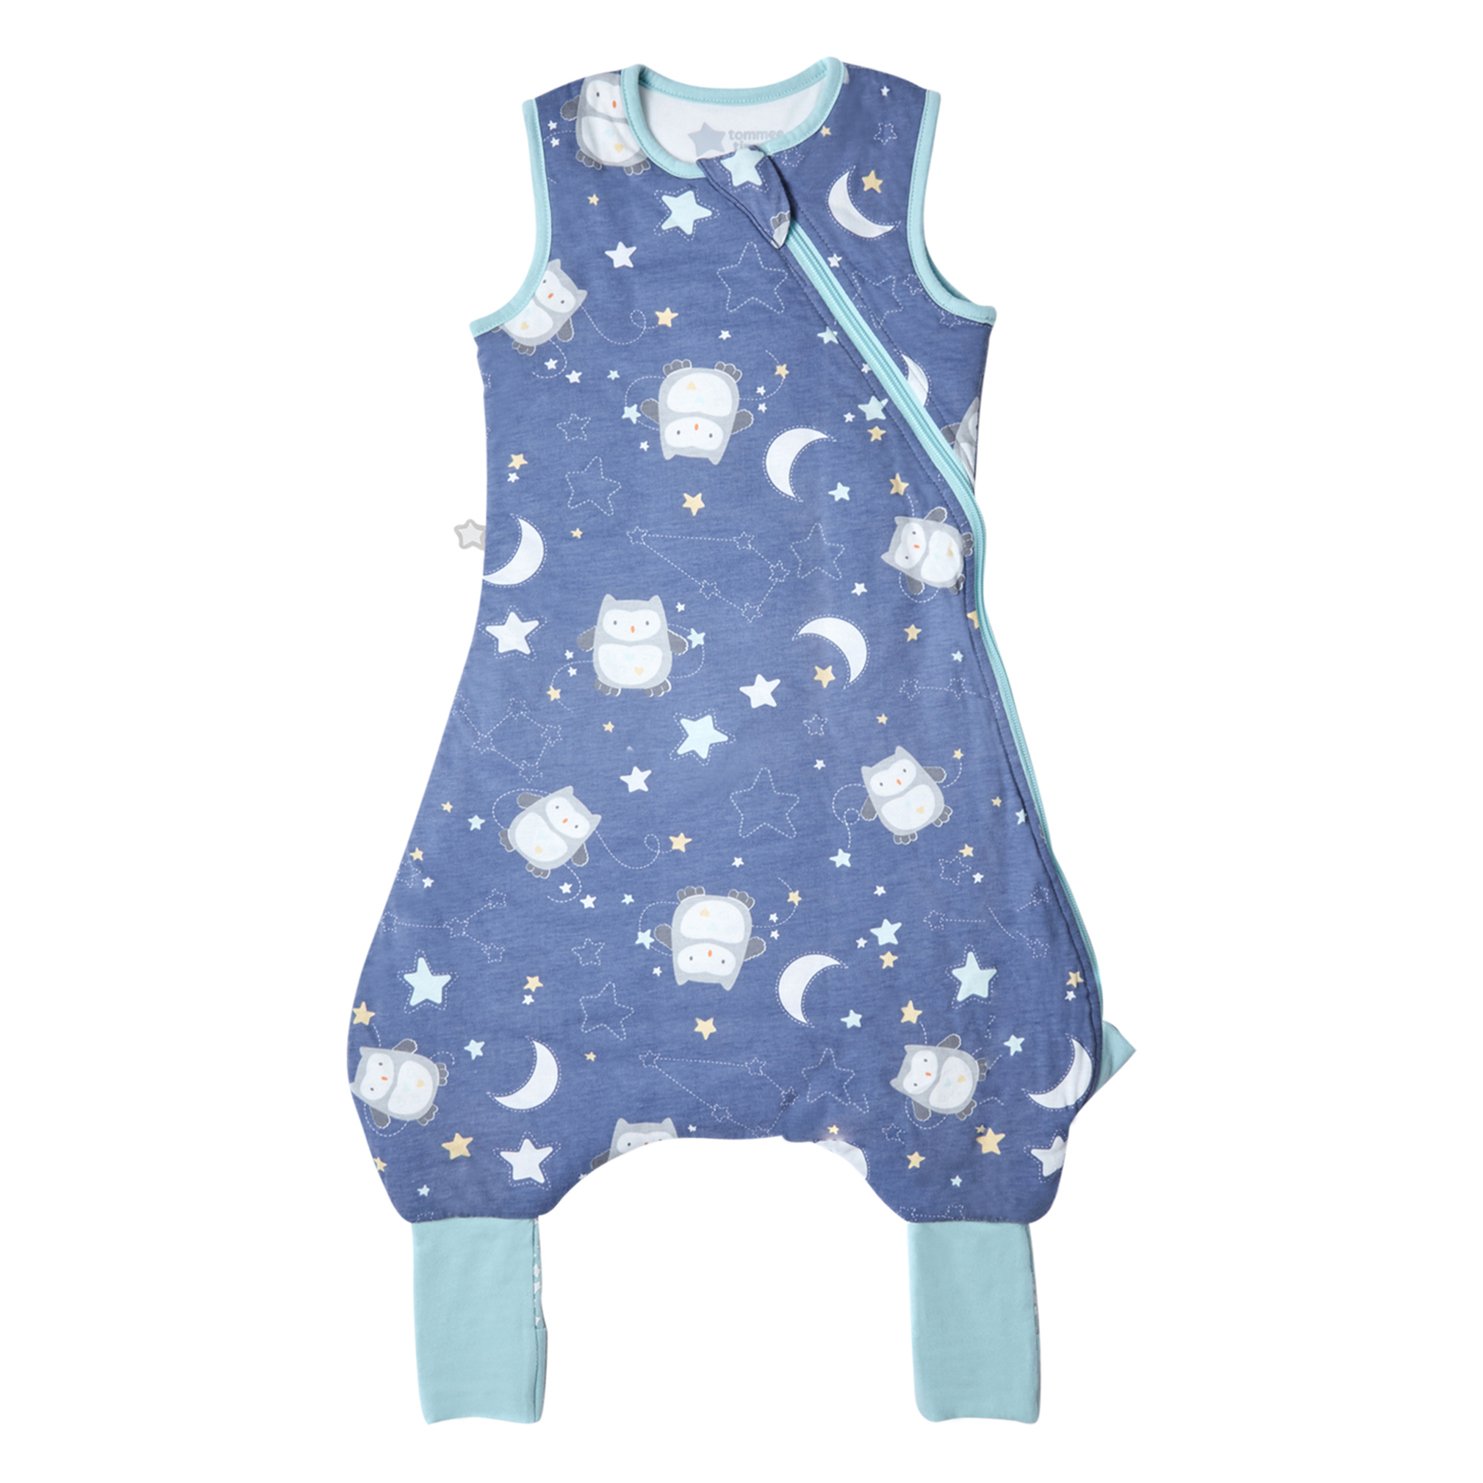 Tommee Tippee Steppee Baby Romper Suit Ollie Dreams Review